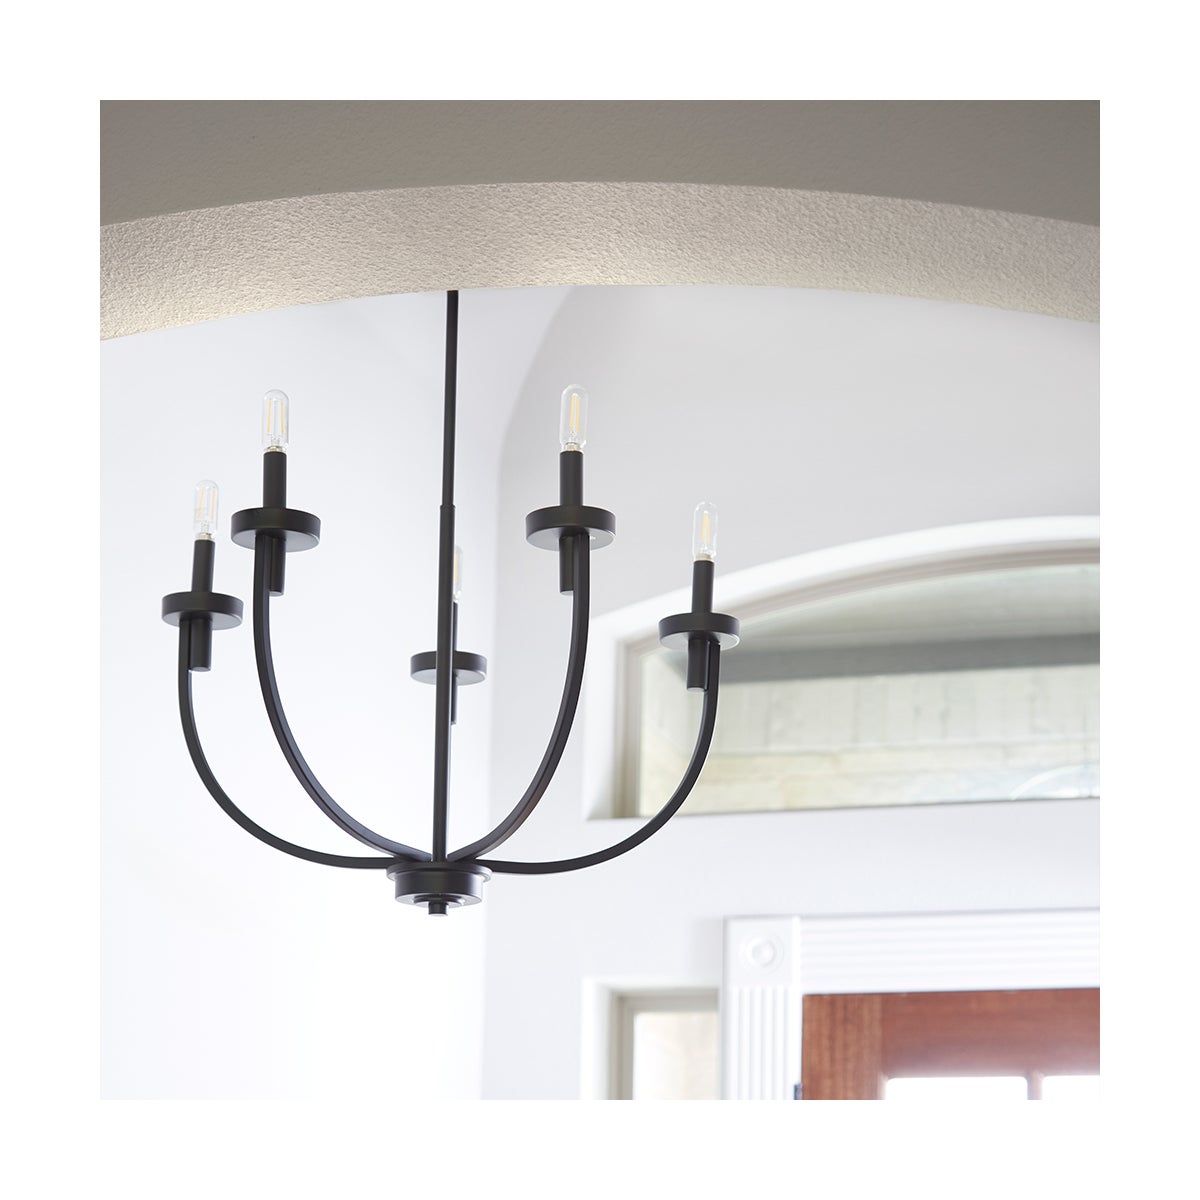 Kitchen Chandelier with rounded angles and bold lines, providing a serene atmosphere with its rounded profile lighting.